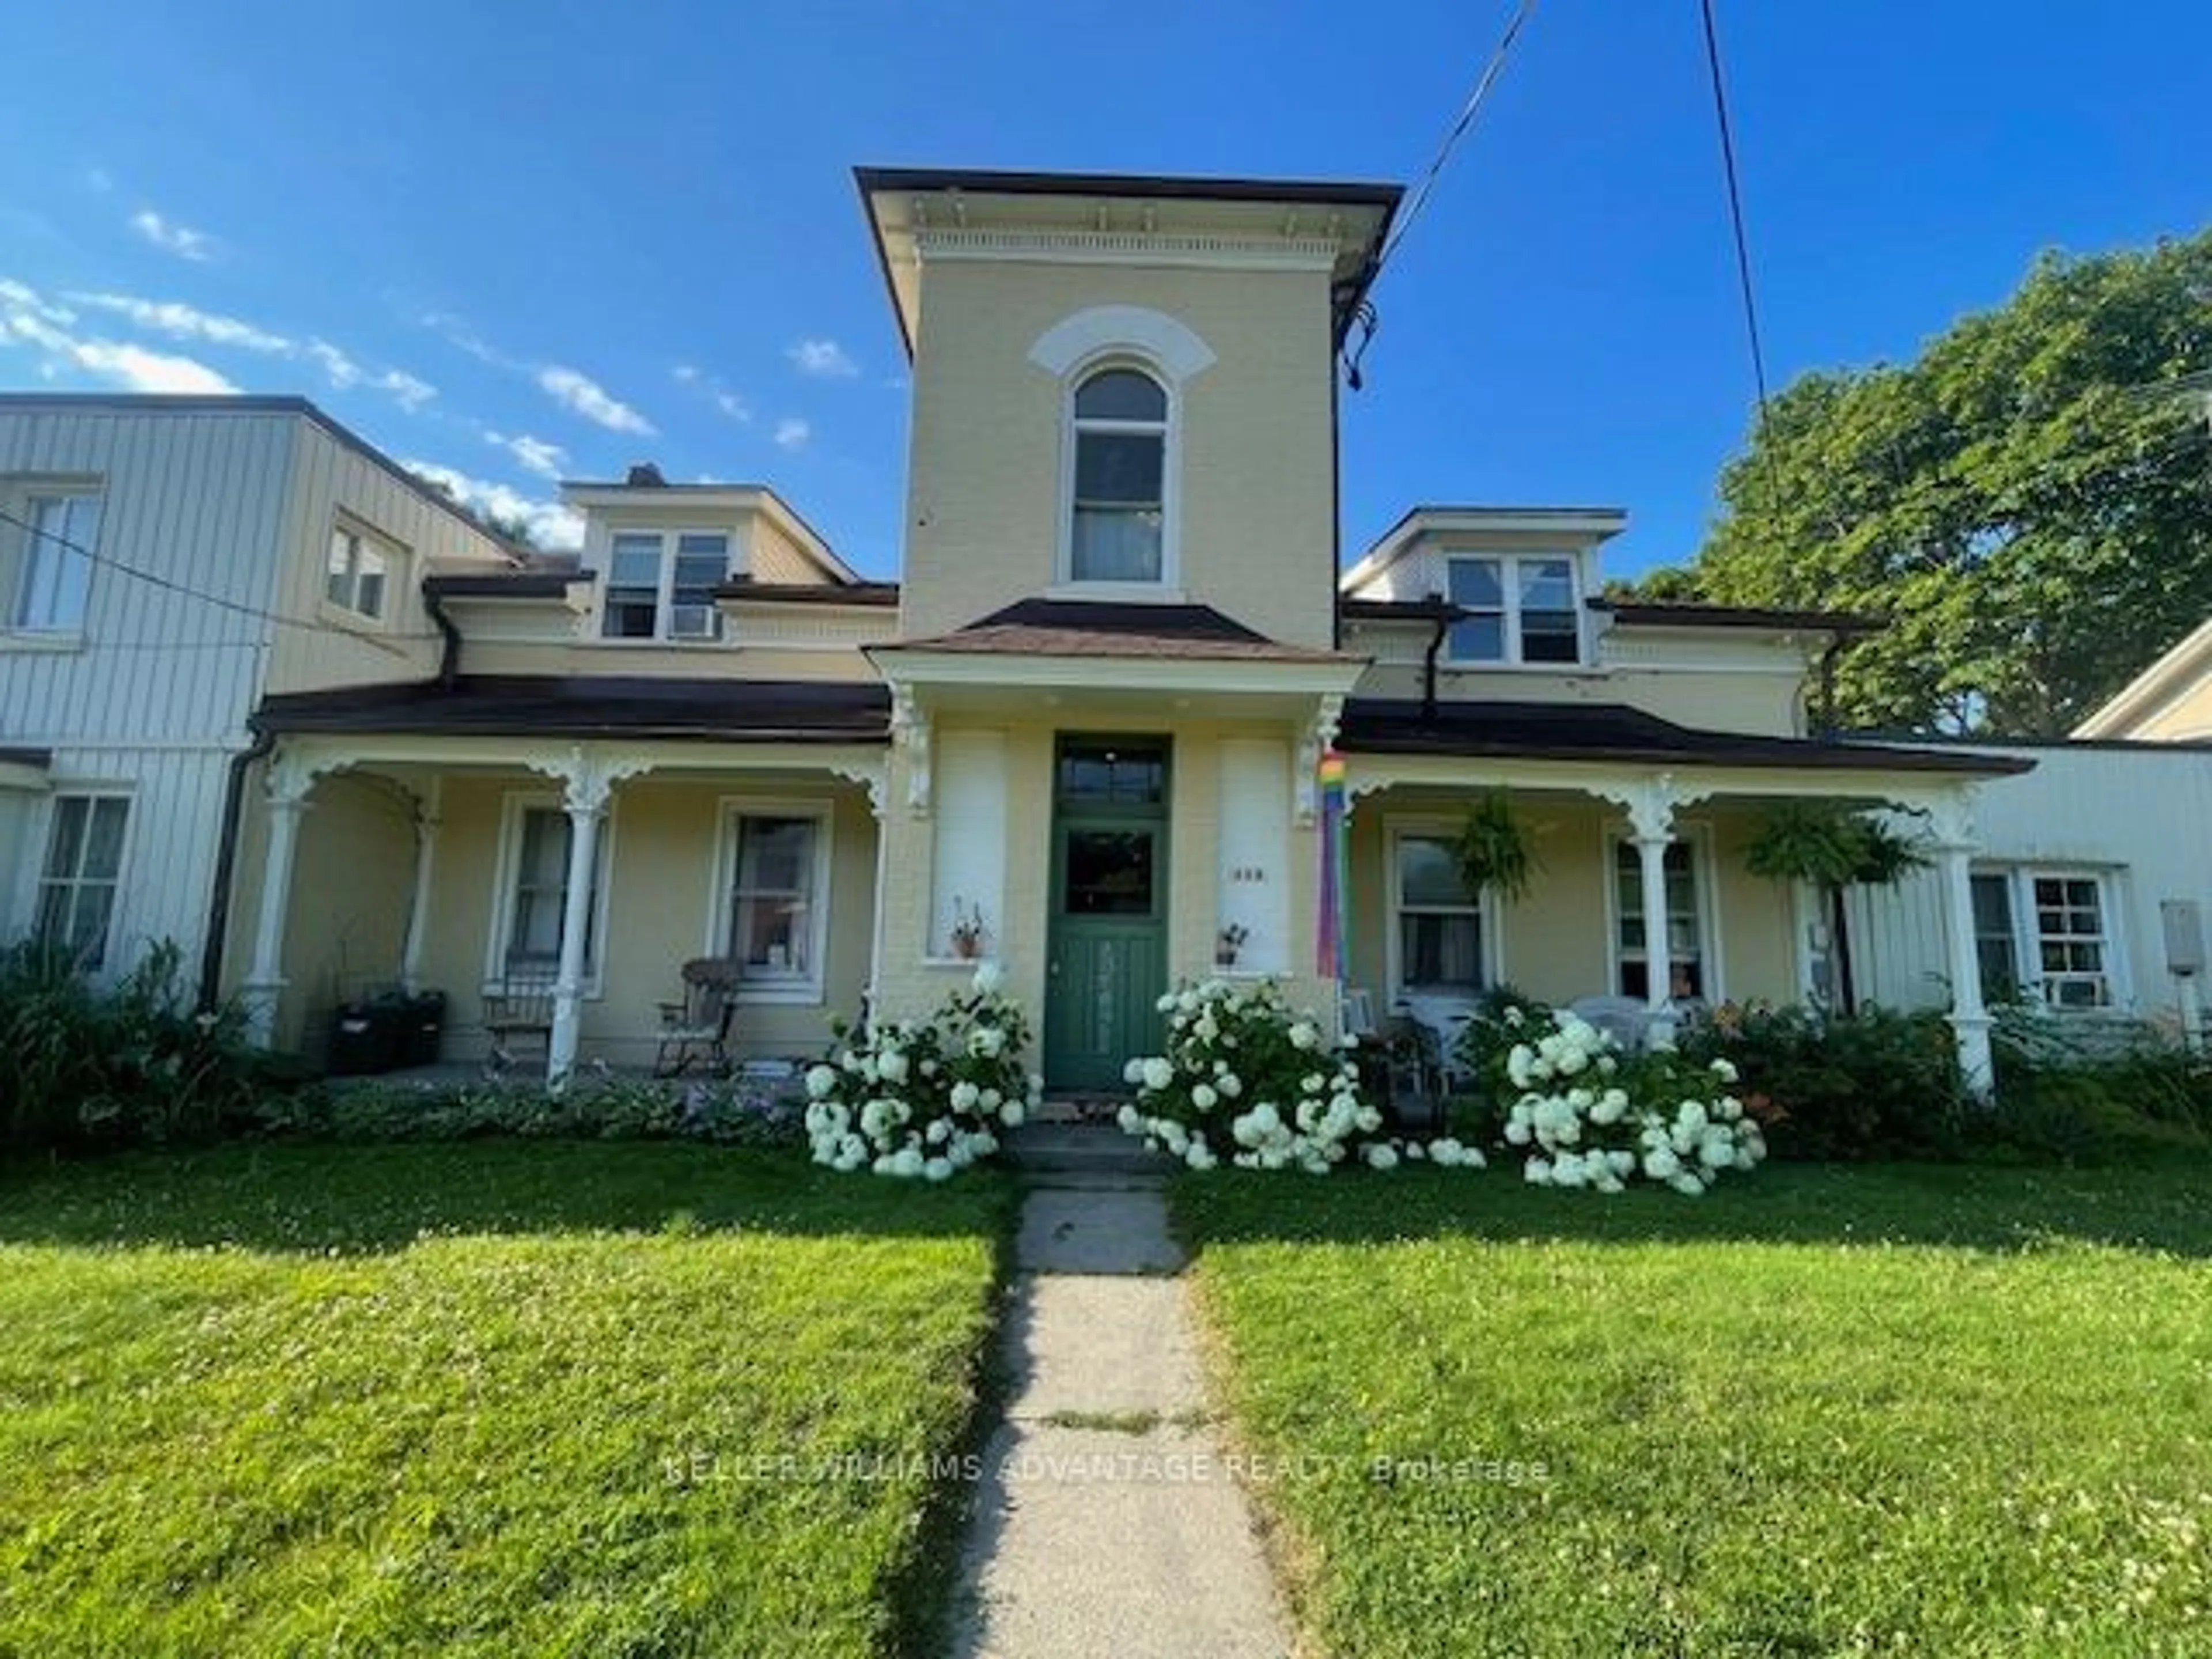 Outside view for 223 Walton St, Port Hope Ontario L1A 1P1